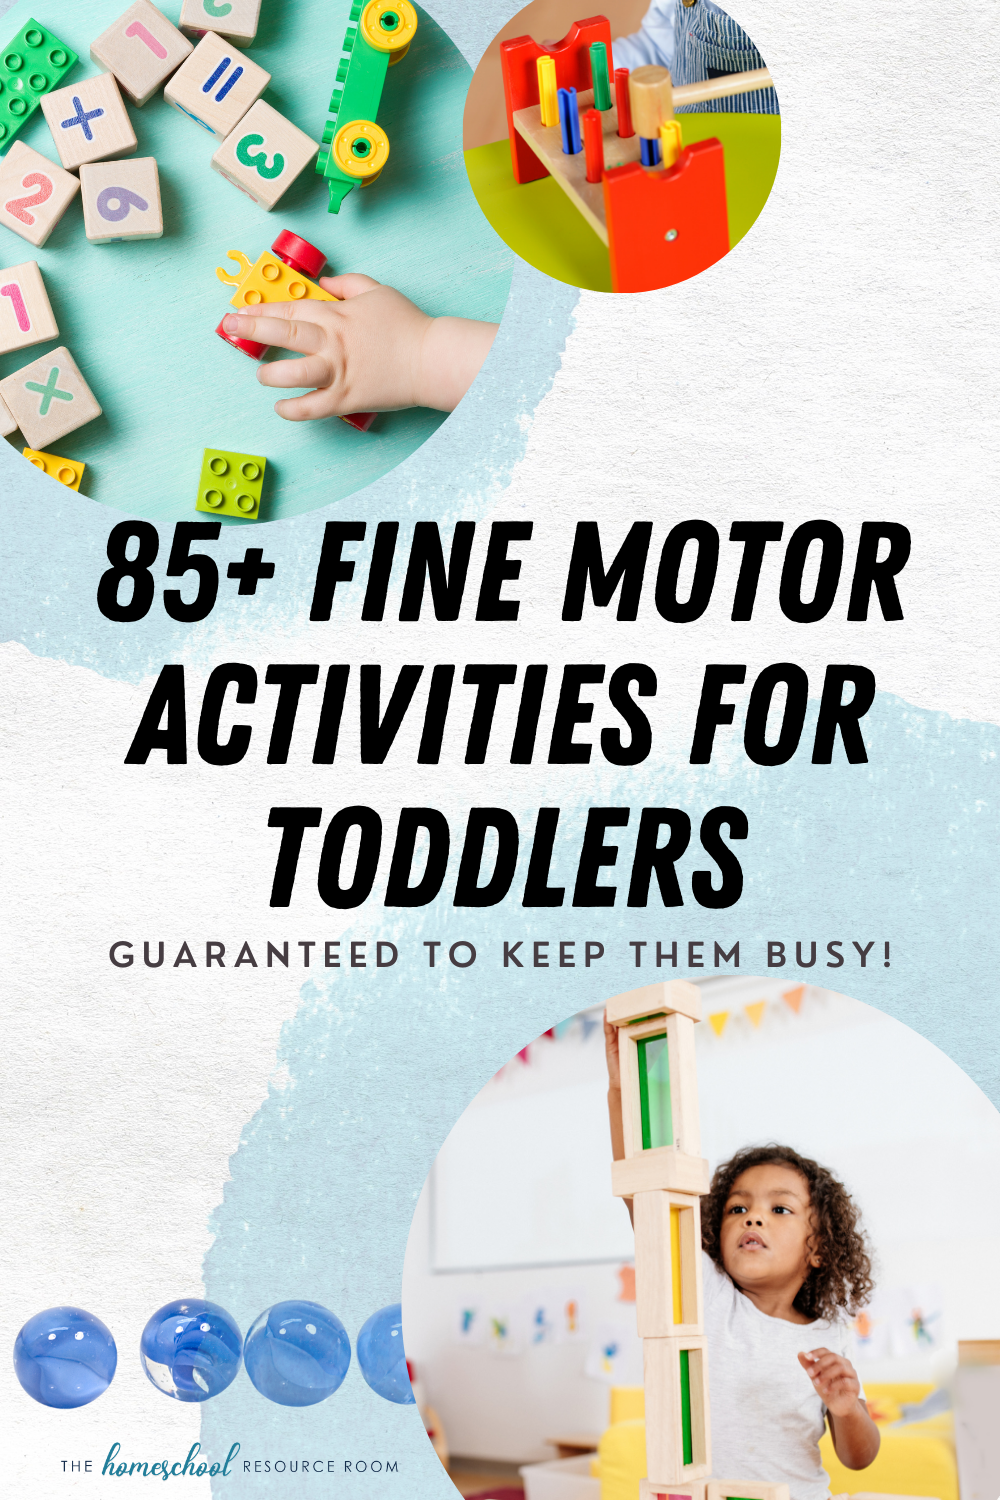 85+ fine motor activities for toddlers. Guaranteed to keep them busy!!